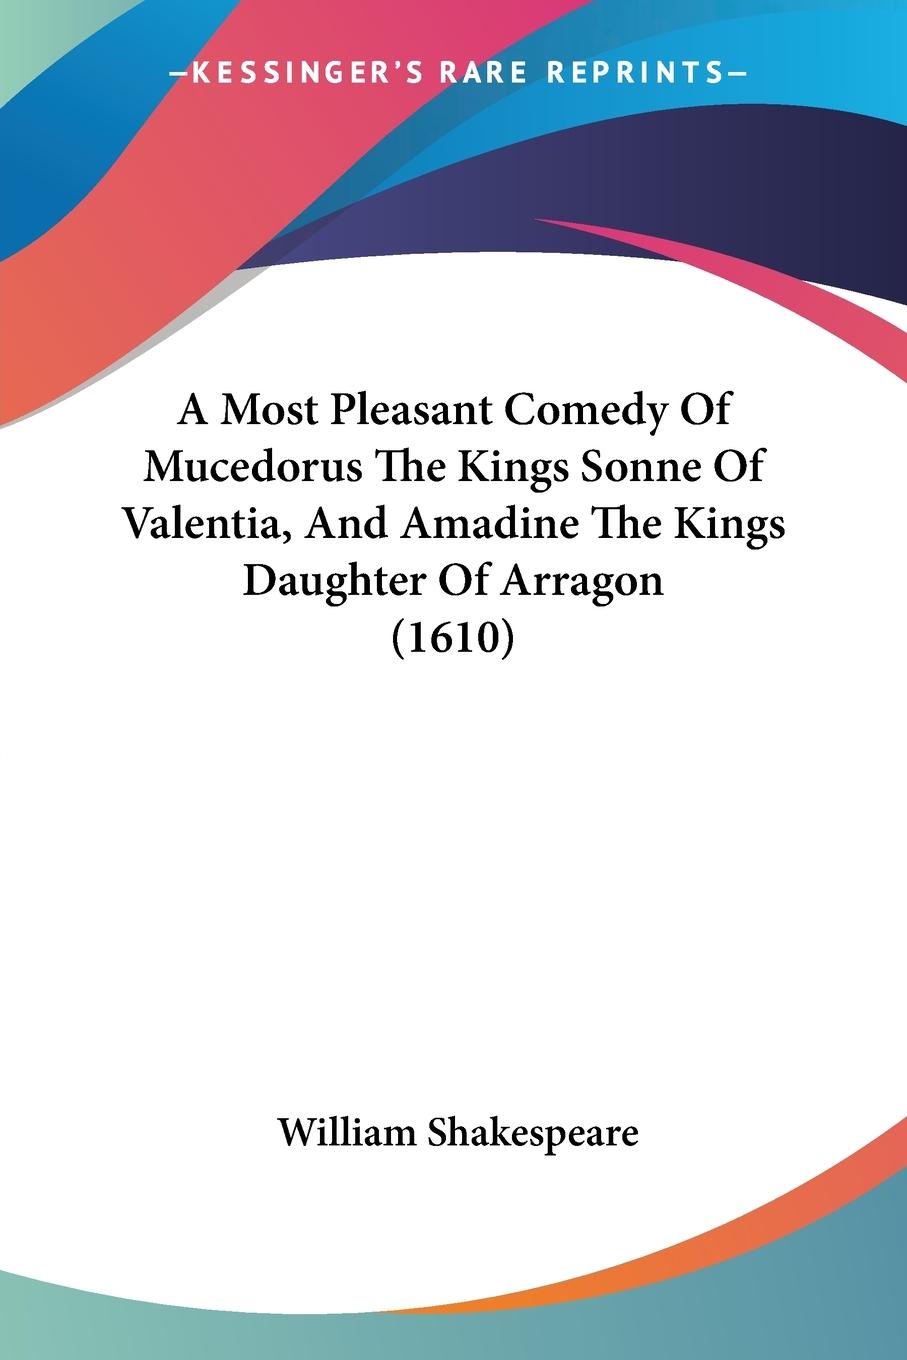 A Most Pleasant Comedy Of Mucedorus The Kings Sonne Of Valentia, And Amadine The Kings Daughter Of Arragon (1610) - Shakespeare, William